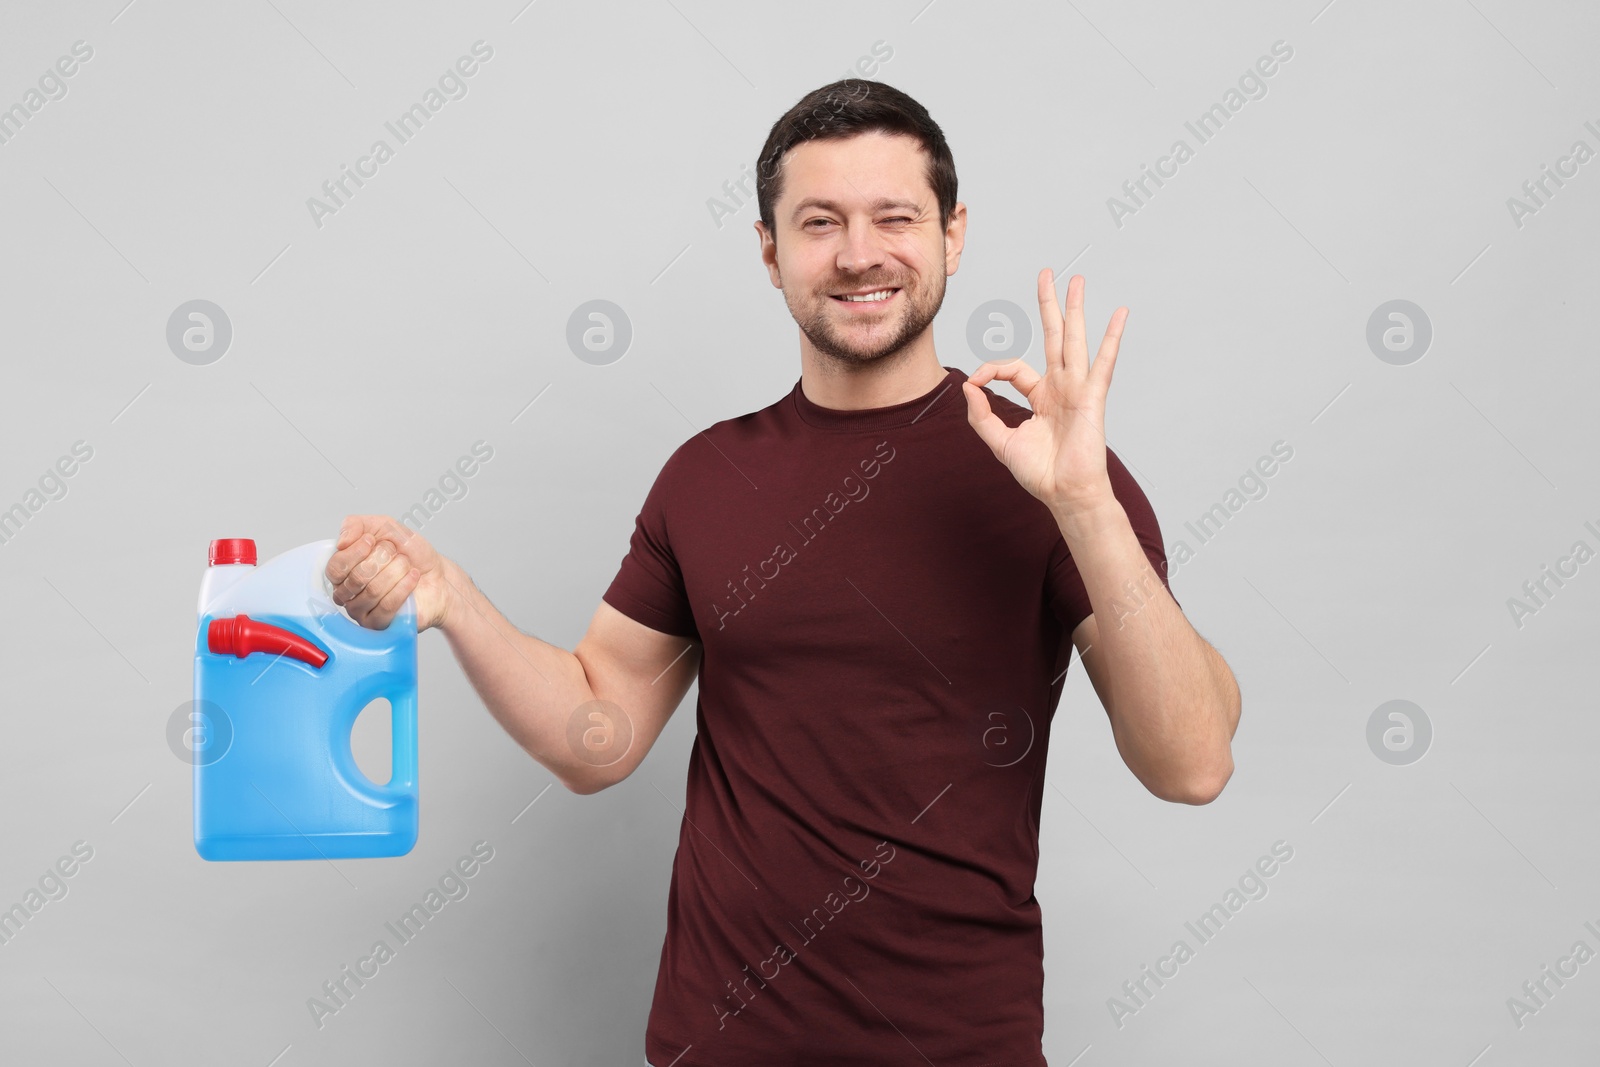 Photo of Man holding canister with blue liquid and showing OK gesture on light grey background